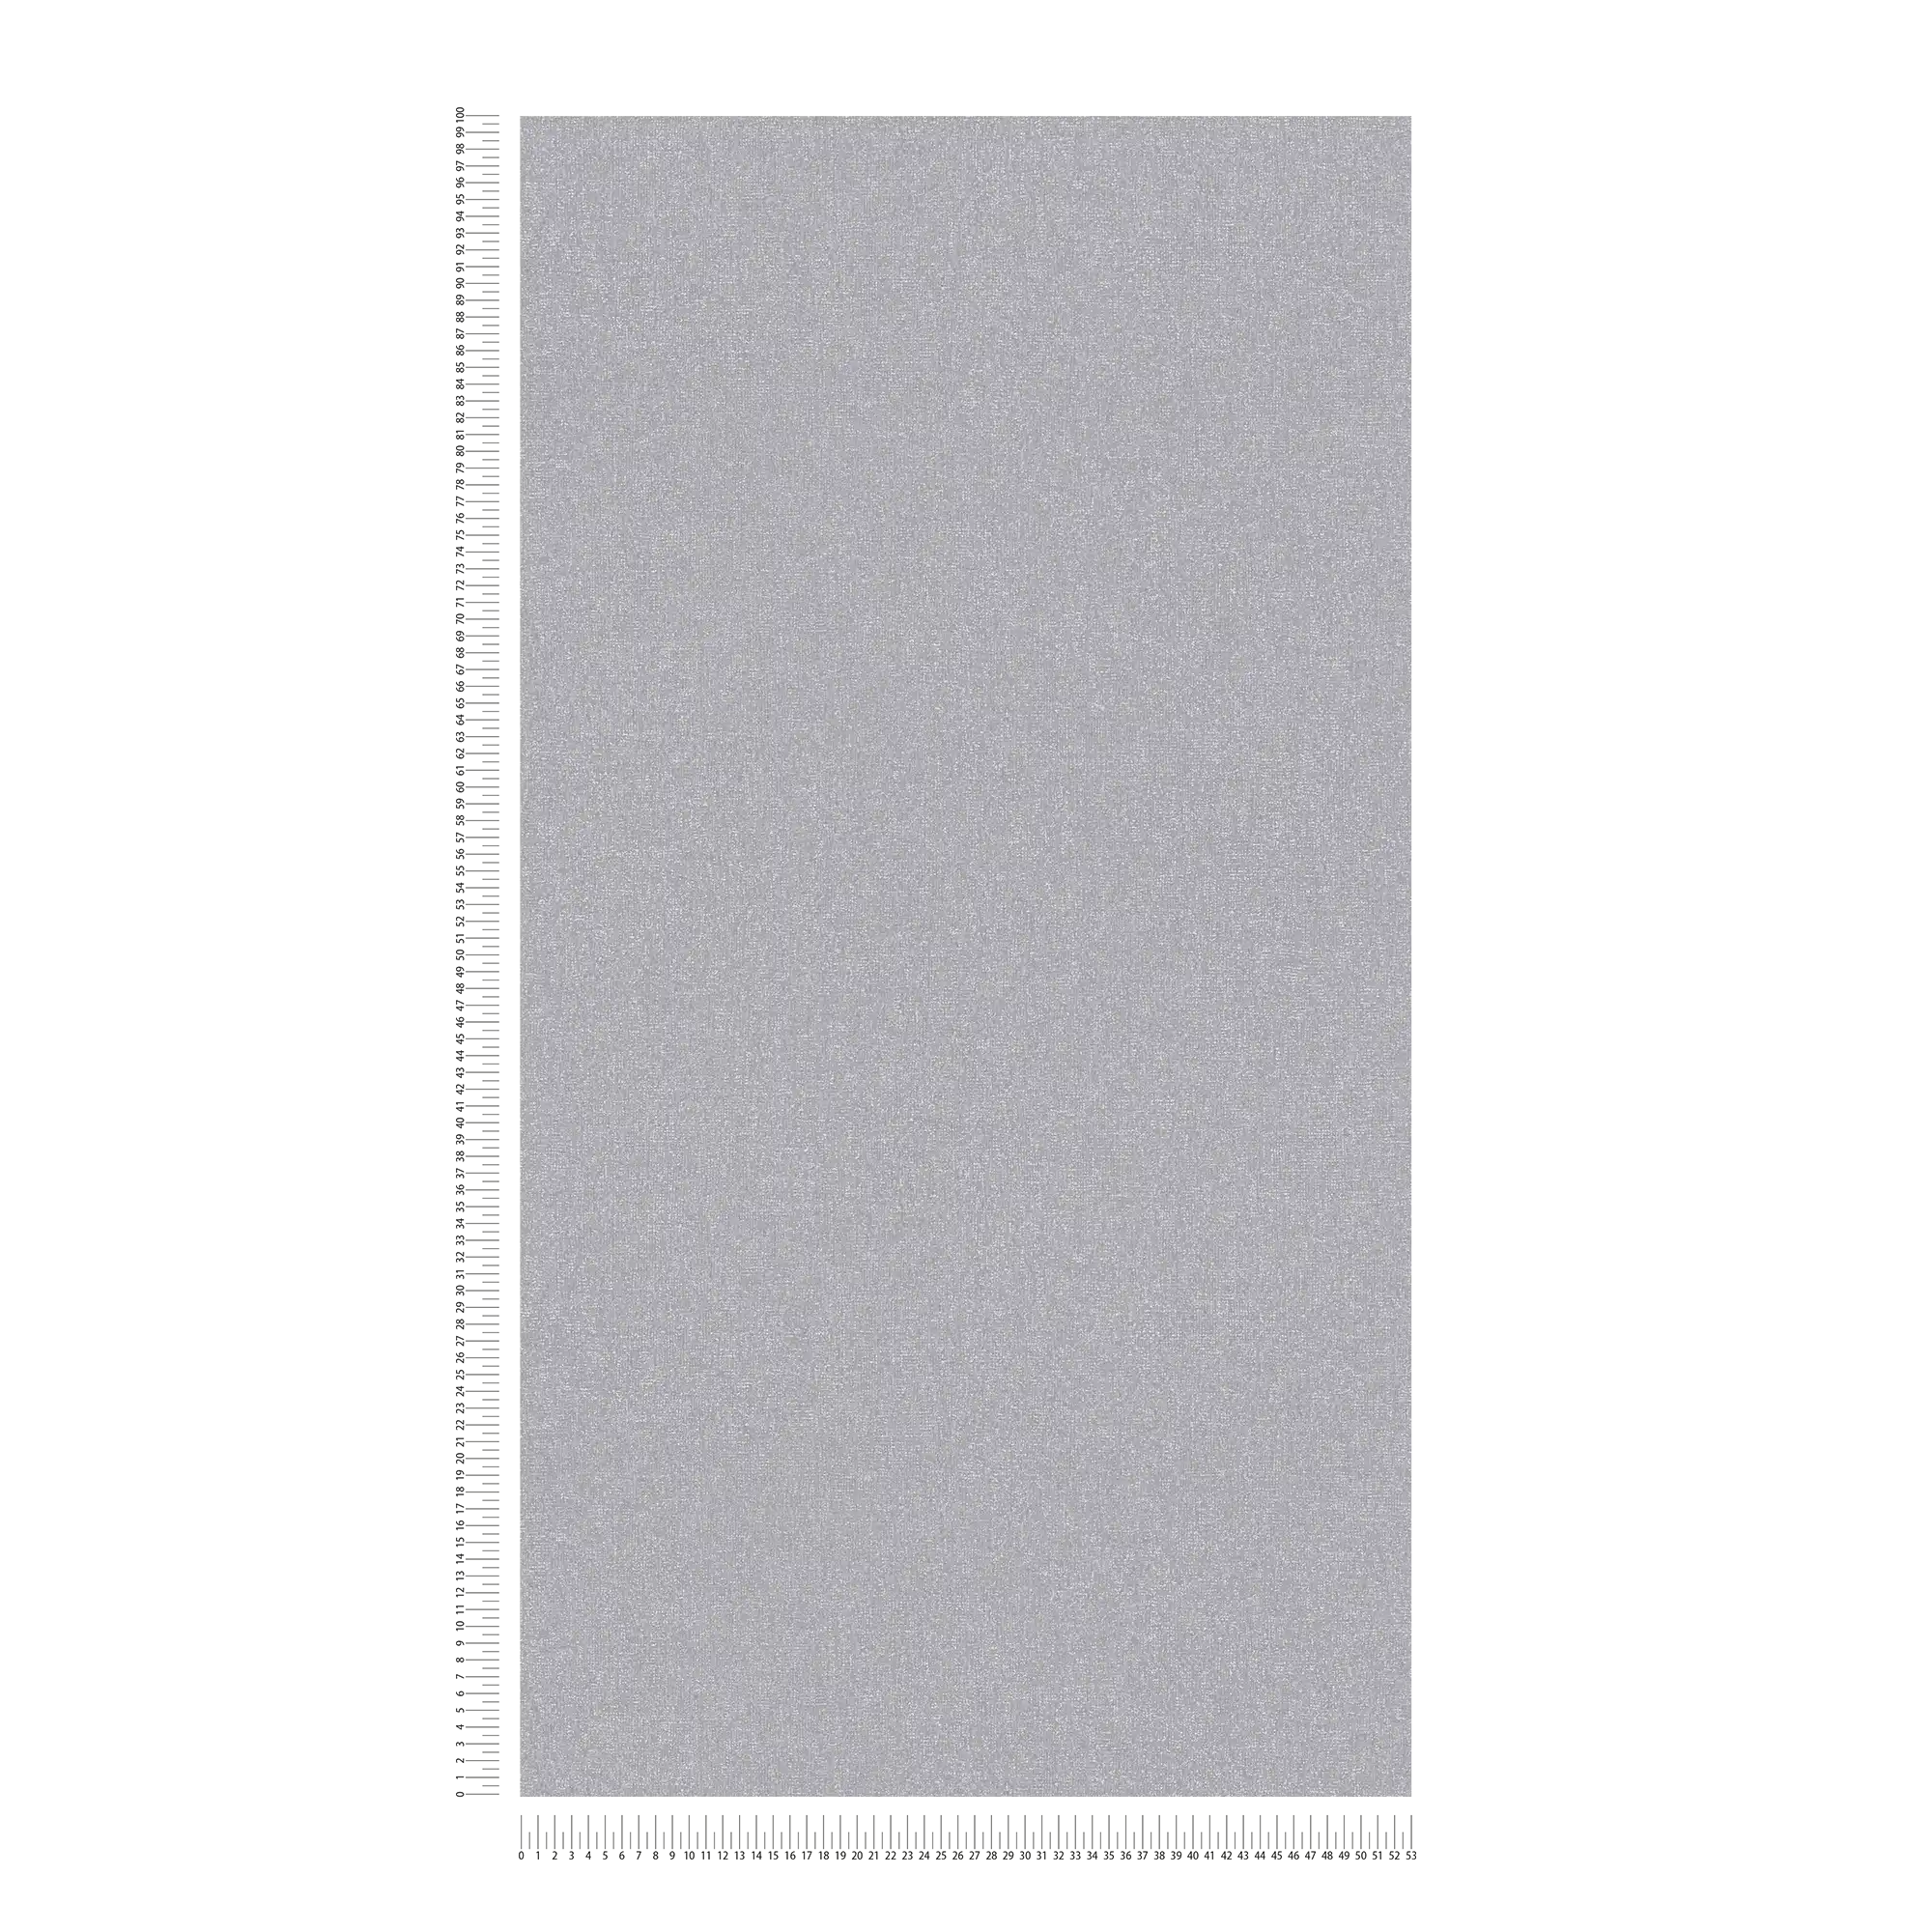             Non-woven wallpaper plains with fine structure - grey
        